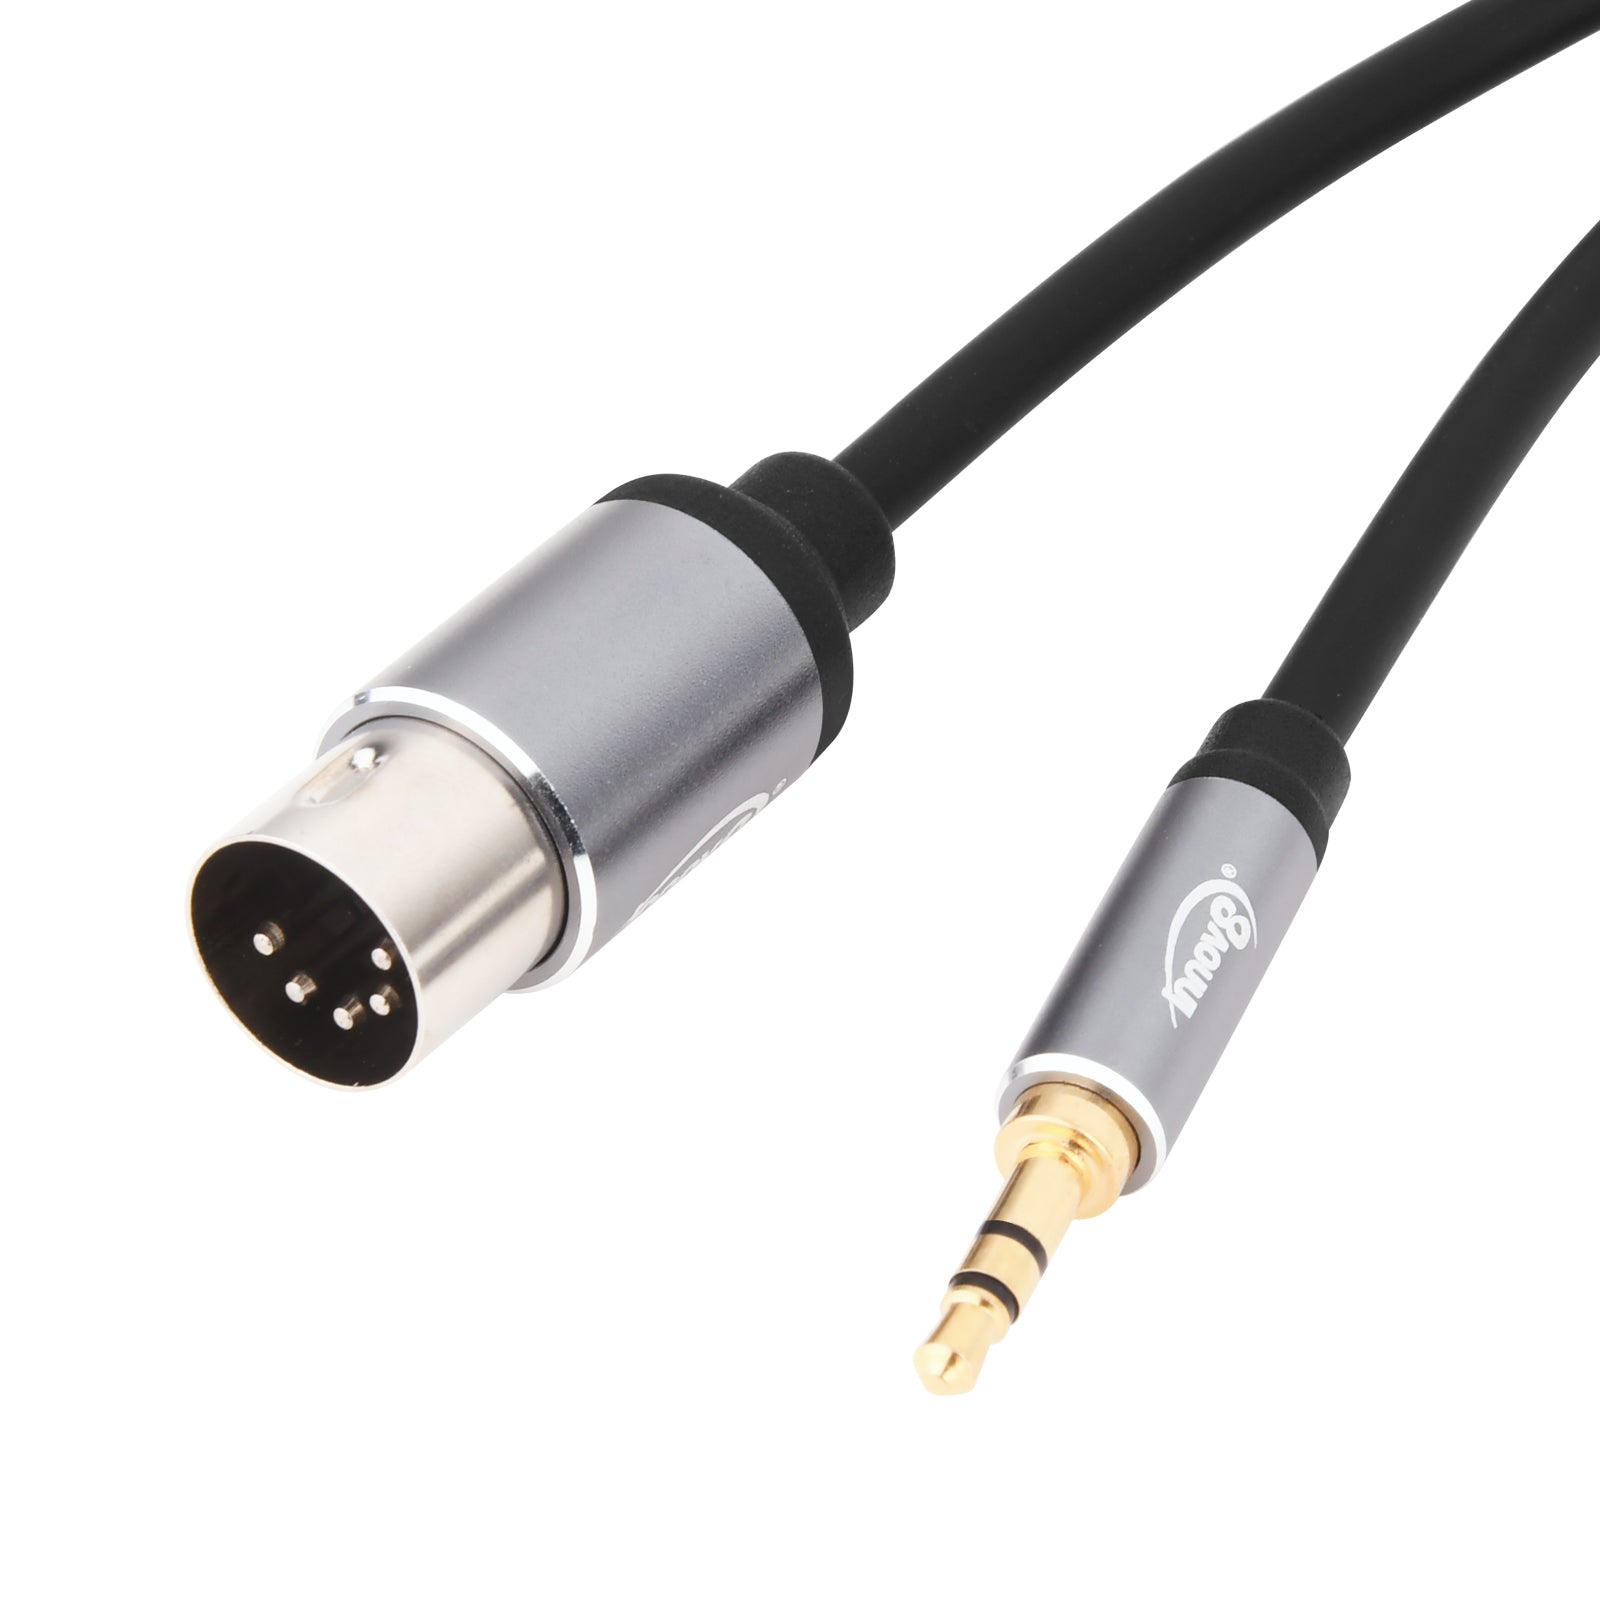 5 Pin DIN Male to 3.5mm TRS Stereo Male Jack Converter Cable for Vintage Stereo Radio Audio Equipment 1M